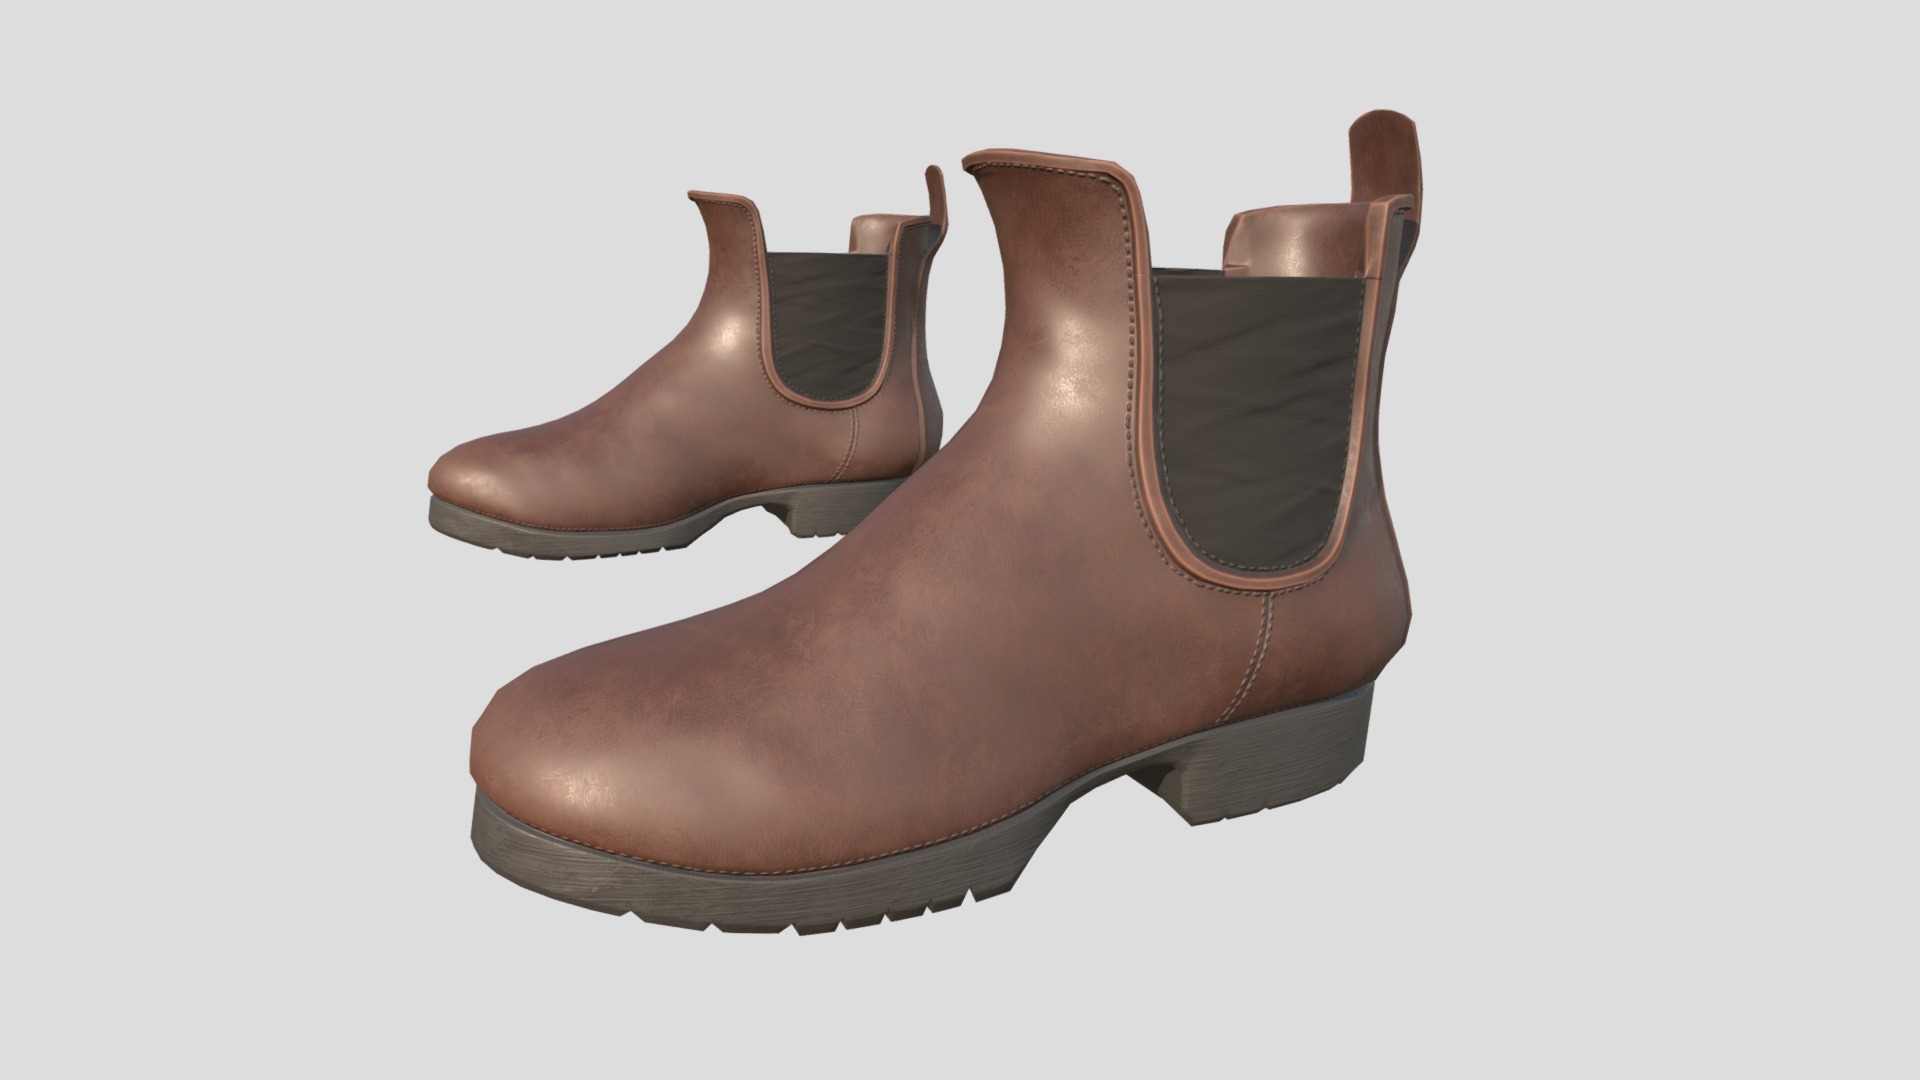 3D model Pocolov Boots Chelsea - This is a 3D model of the Pocolov Boots Chelsea. The 3D model is about a brown leather boot.